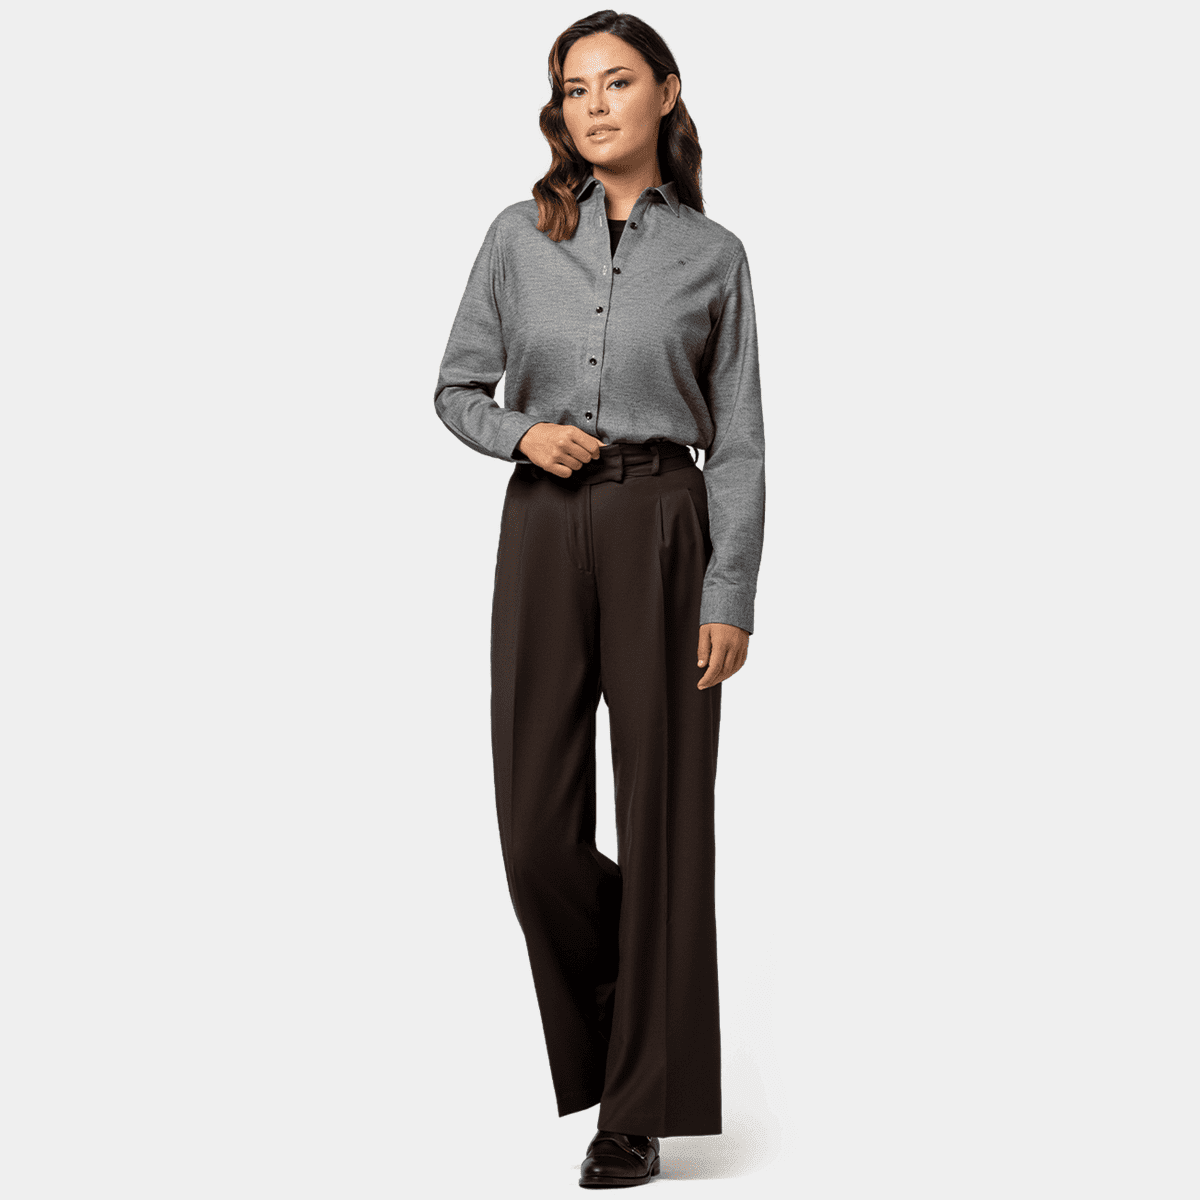 Chocolate brown high waisted pleated essential Women Trousers